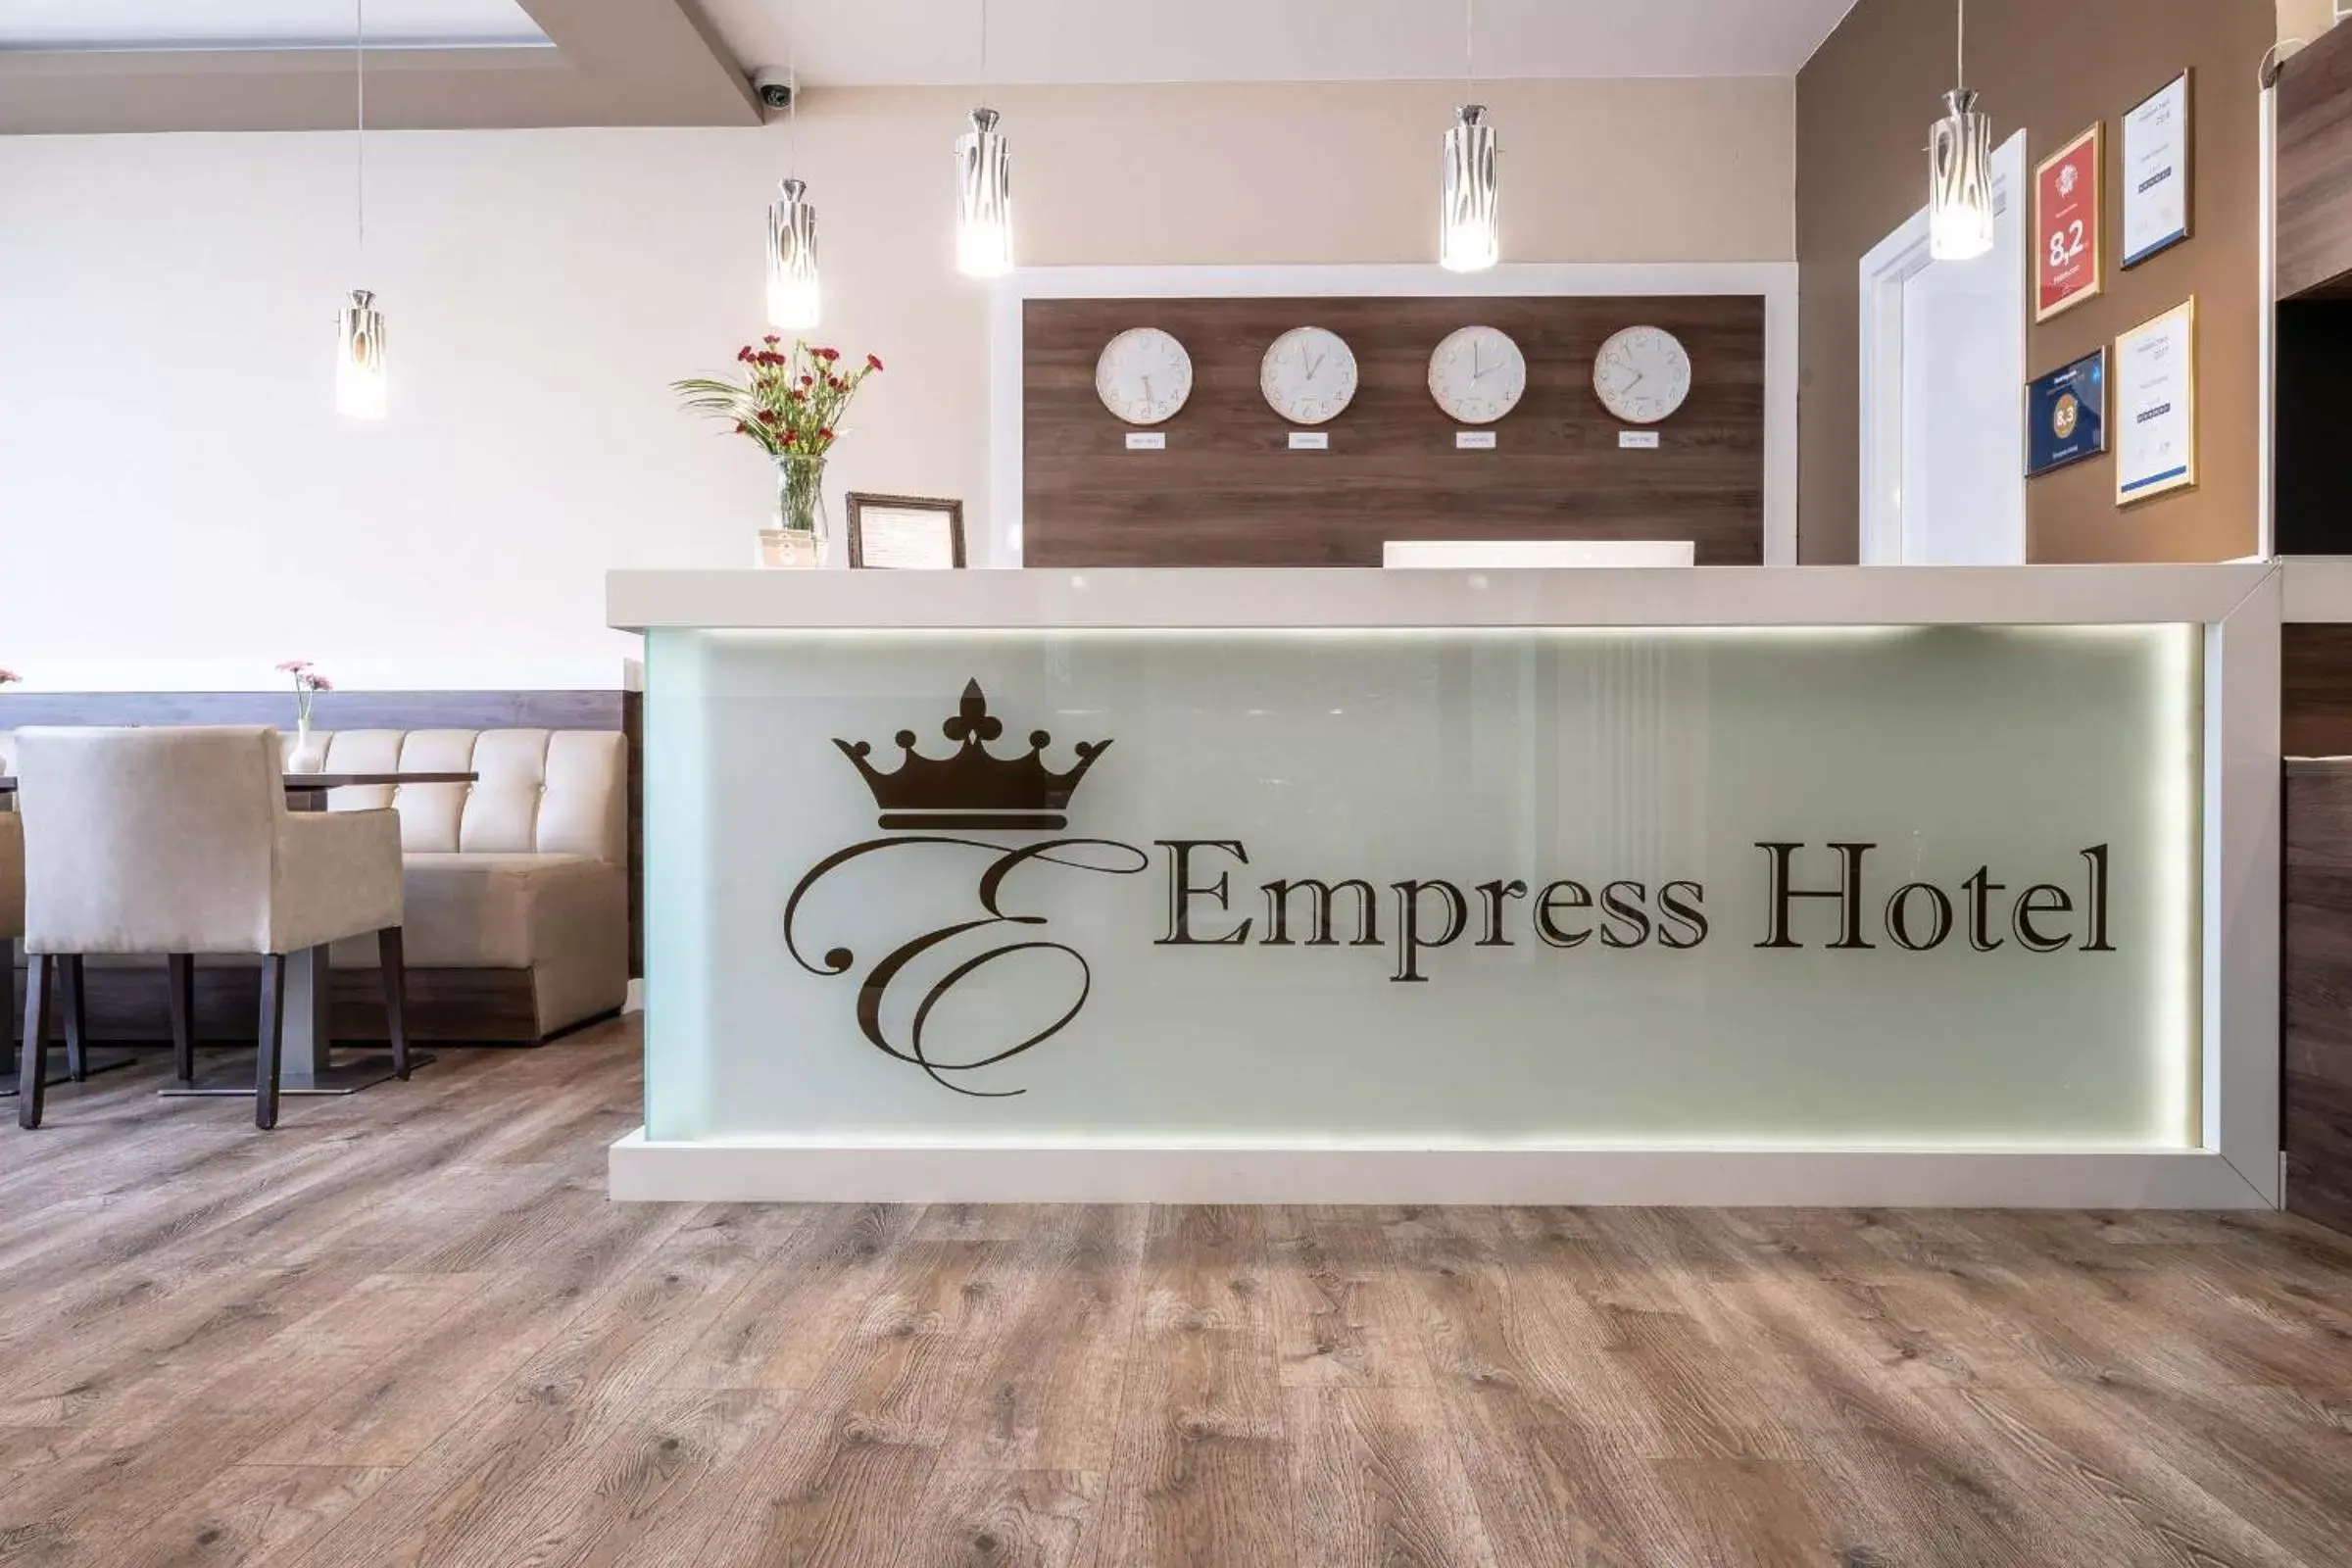 Property logo or sign in Empress Boutique Hotel